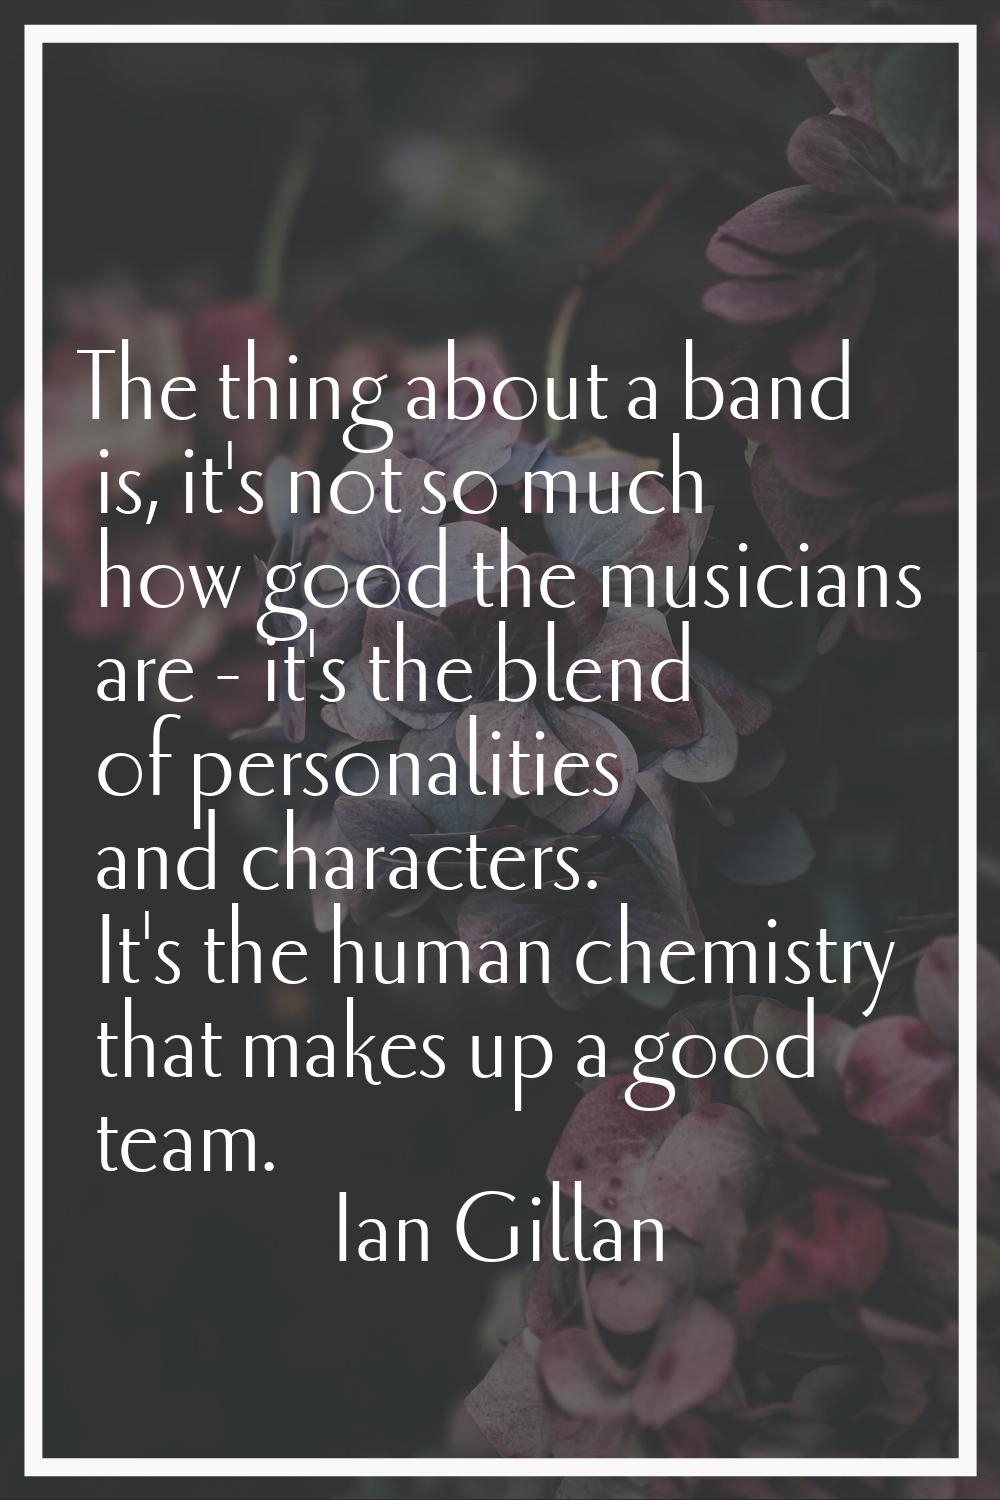 The thing about a band is, it's not so much how good the musicians are - it's the blend of personal